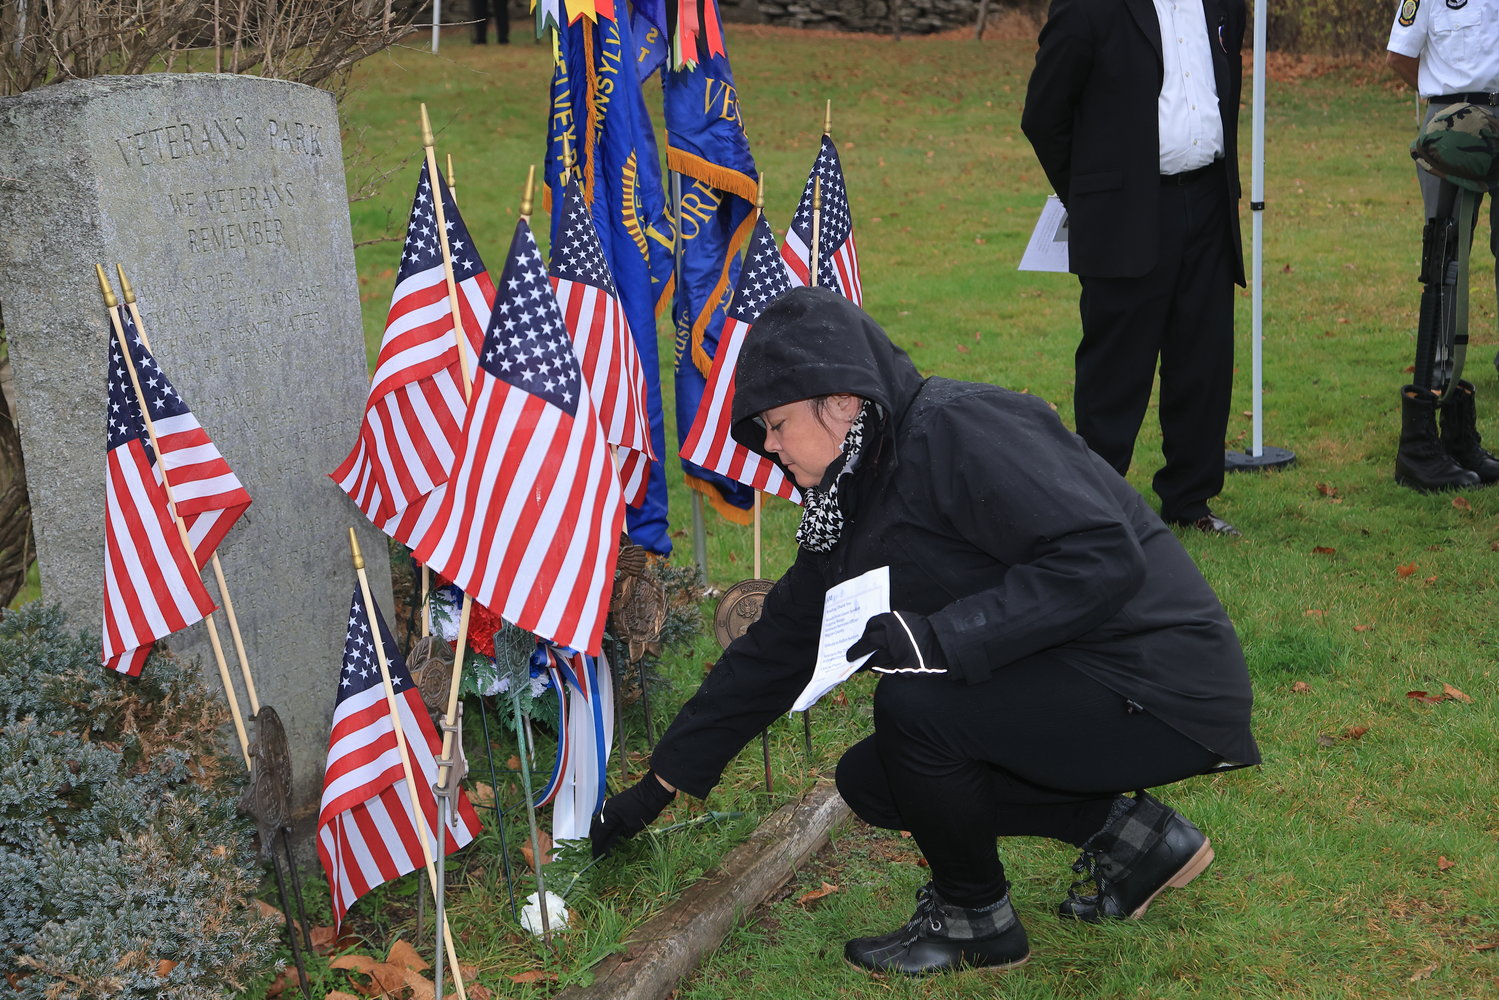 A member of the VFW Ladies Auxiliary takes part in the laying of the Veterans Day wreath at the foot of the monument stone at Veterans Park, Honesdale, PA.